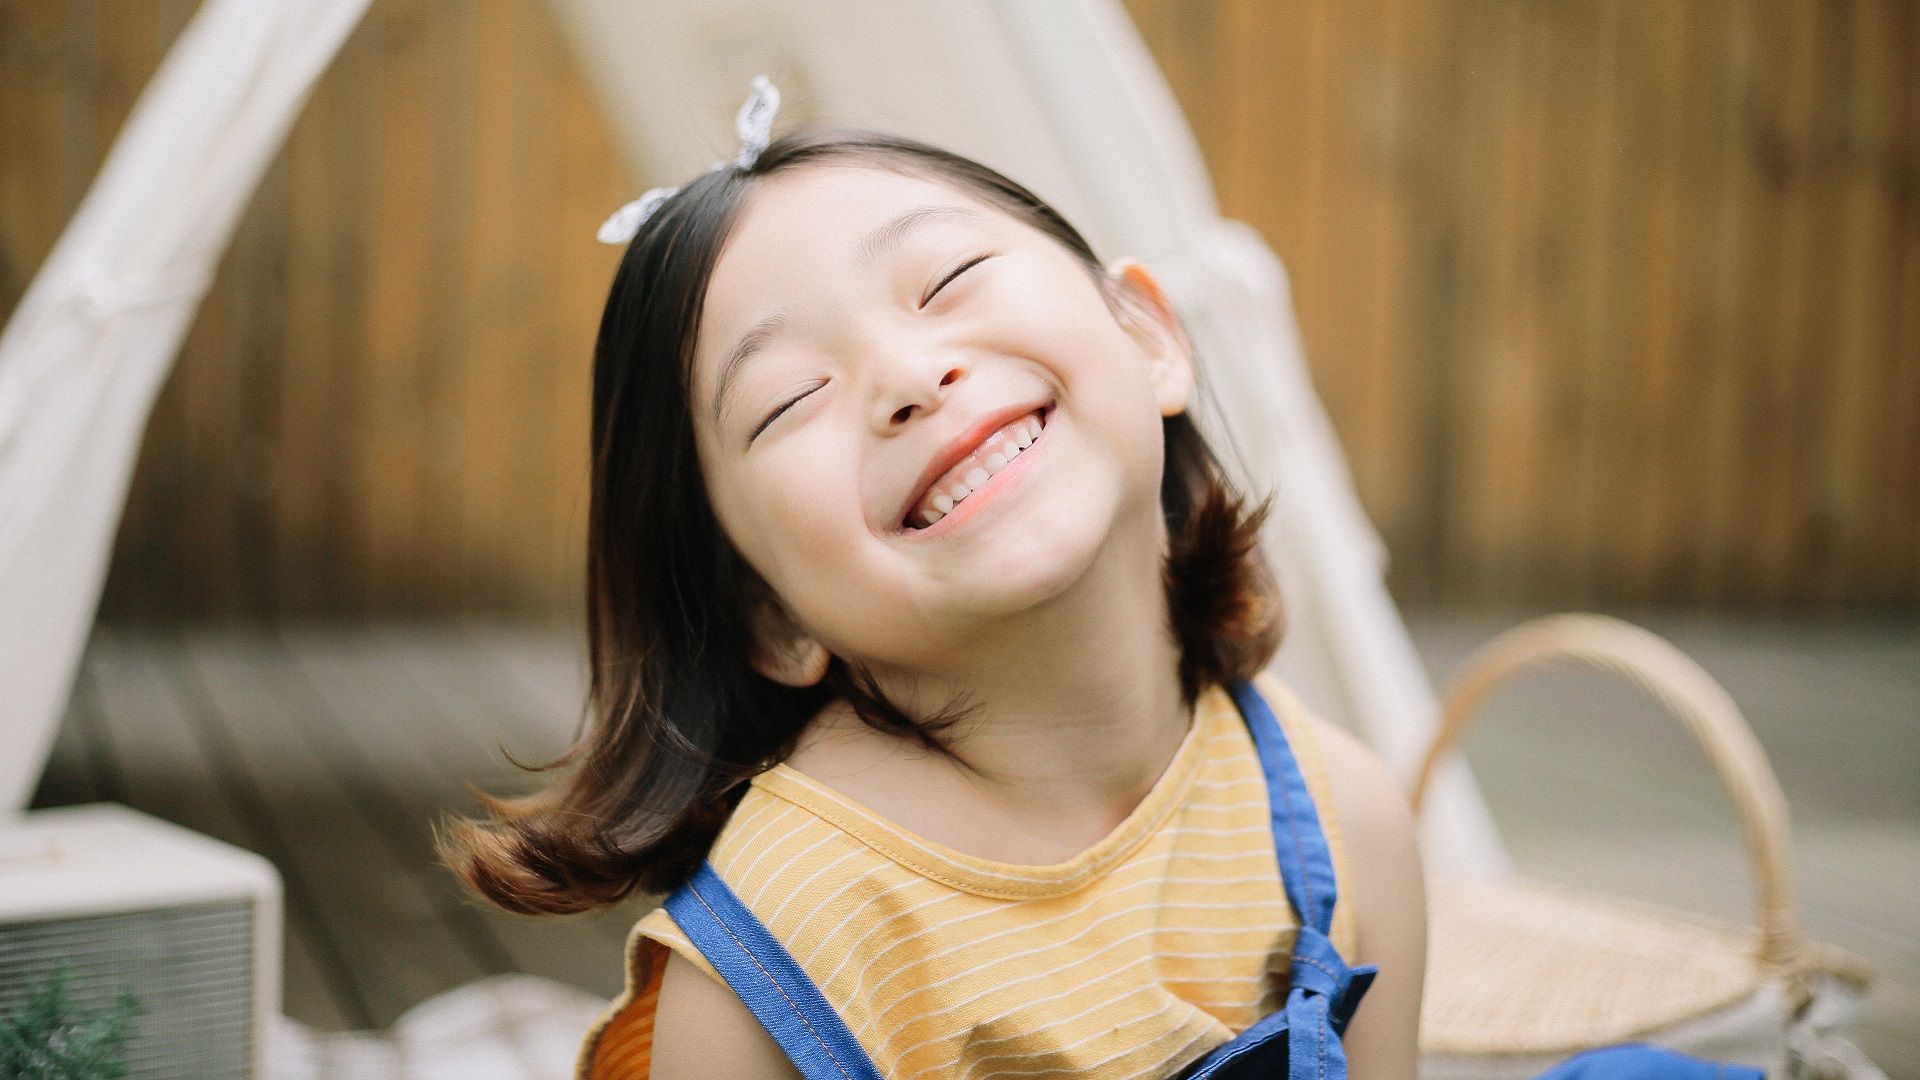 A girl with ADHD smiles because her parents use positive parenting techniques.